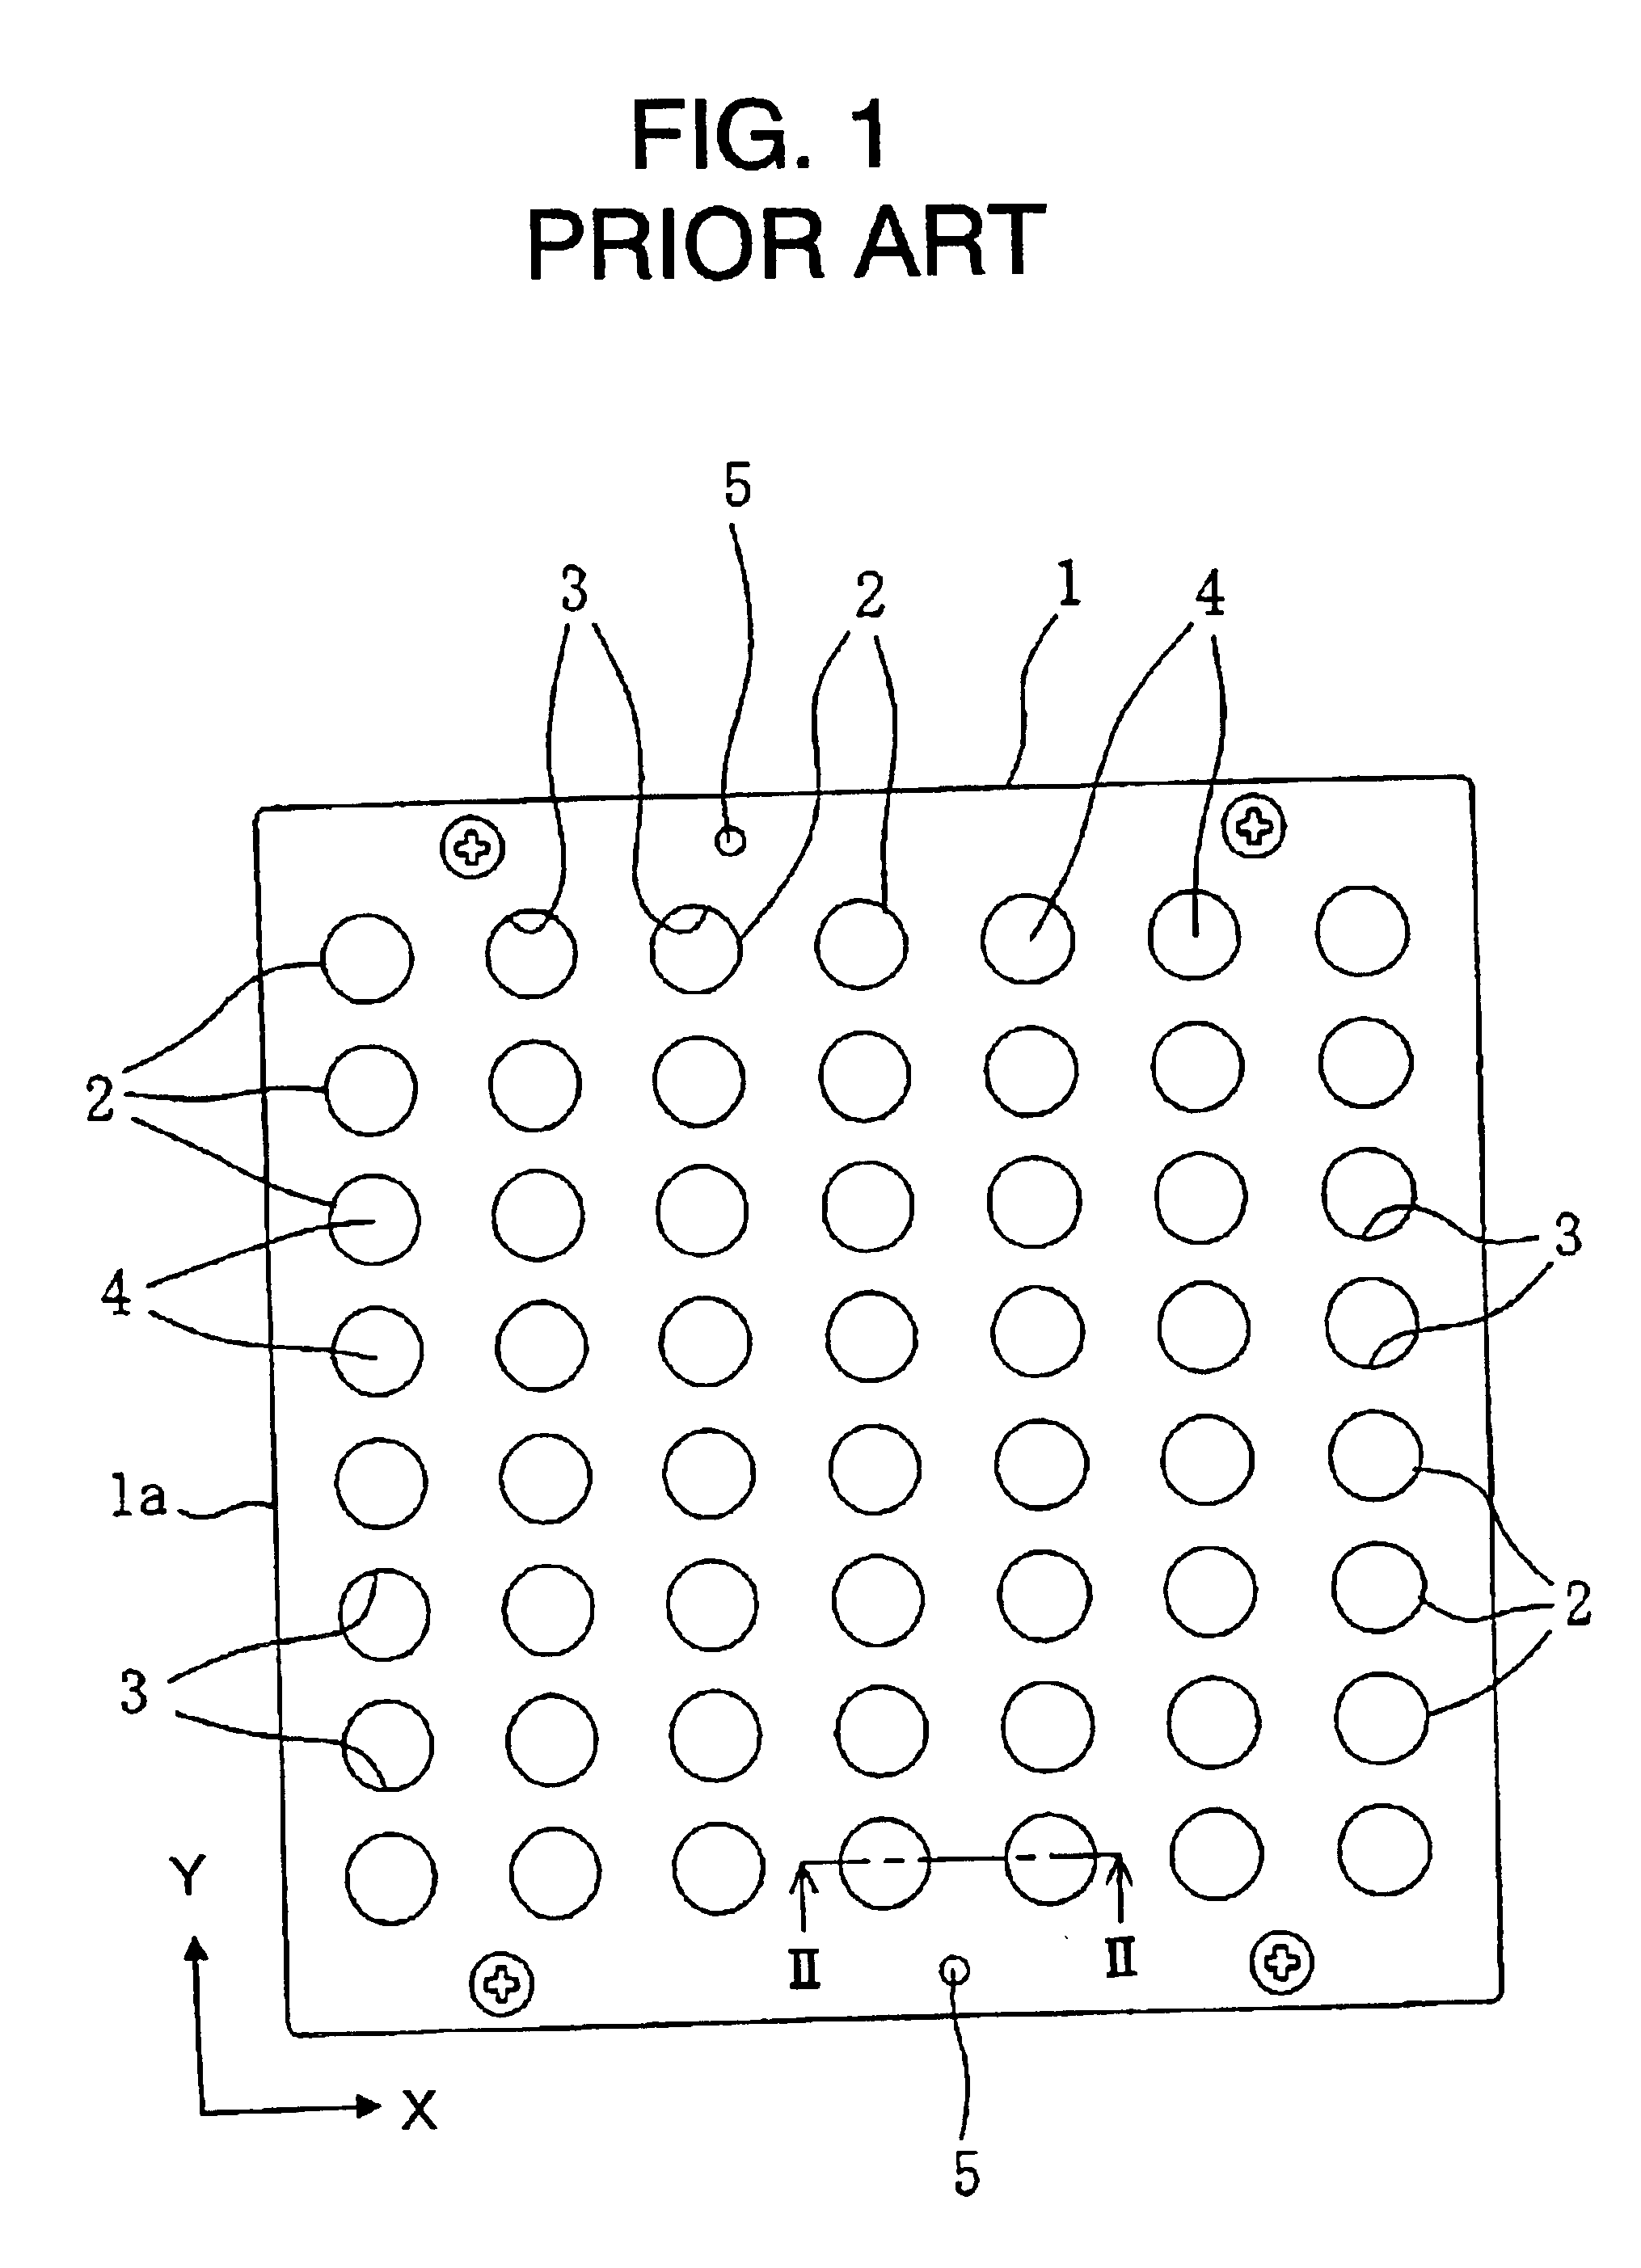 Method of manufacturing strain-detecting devices